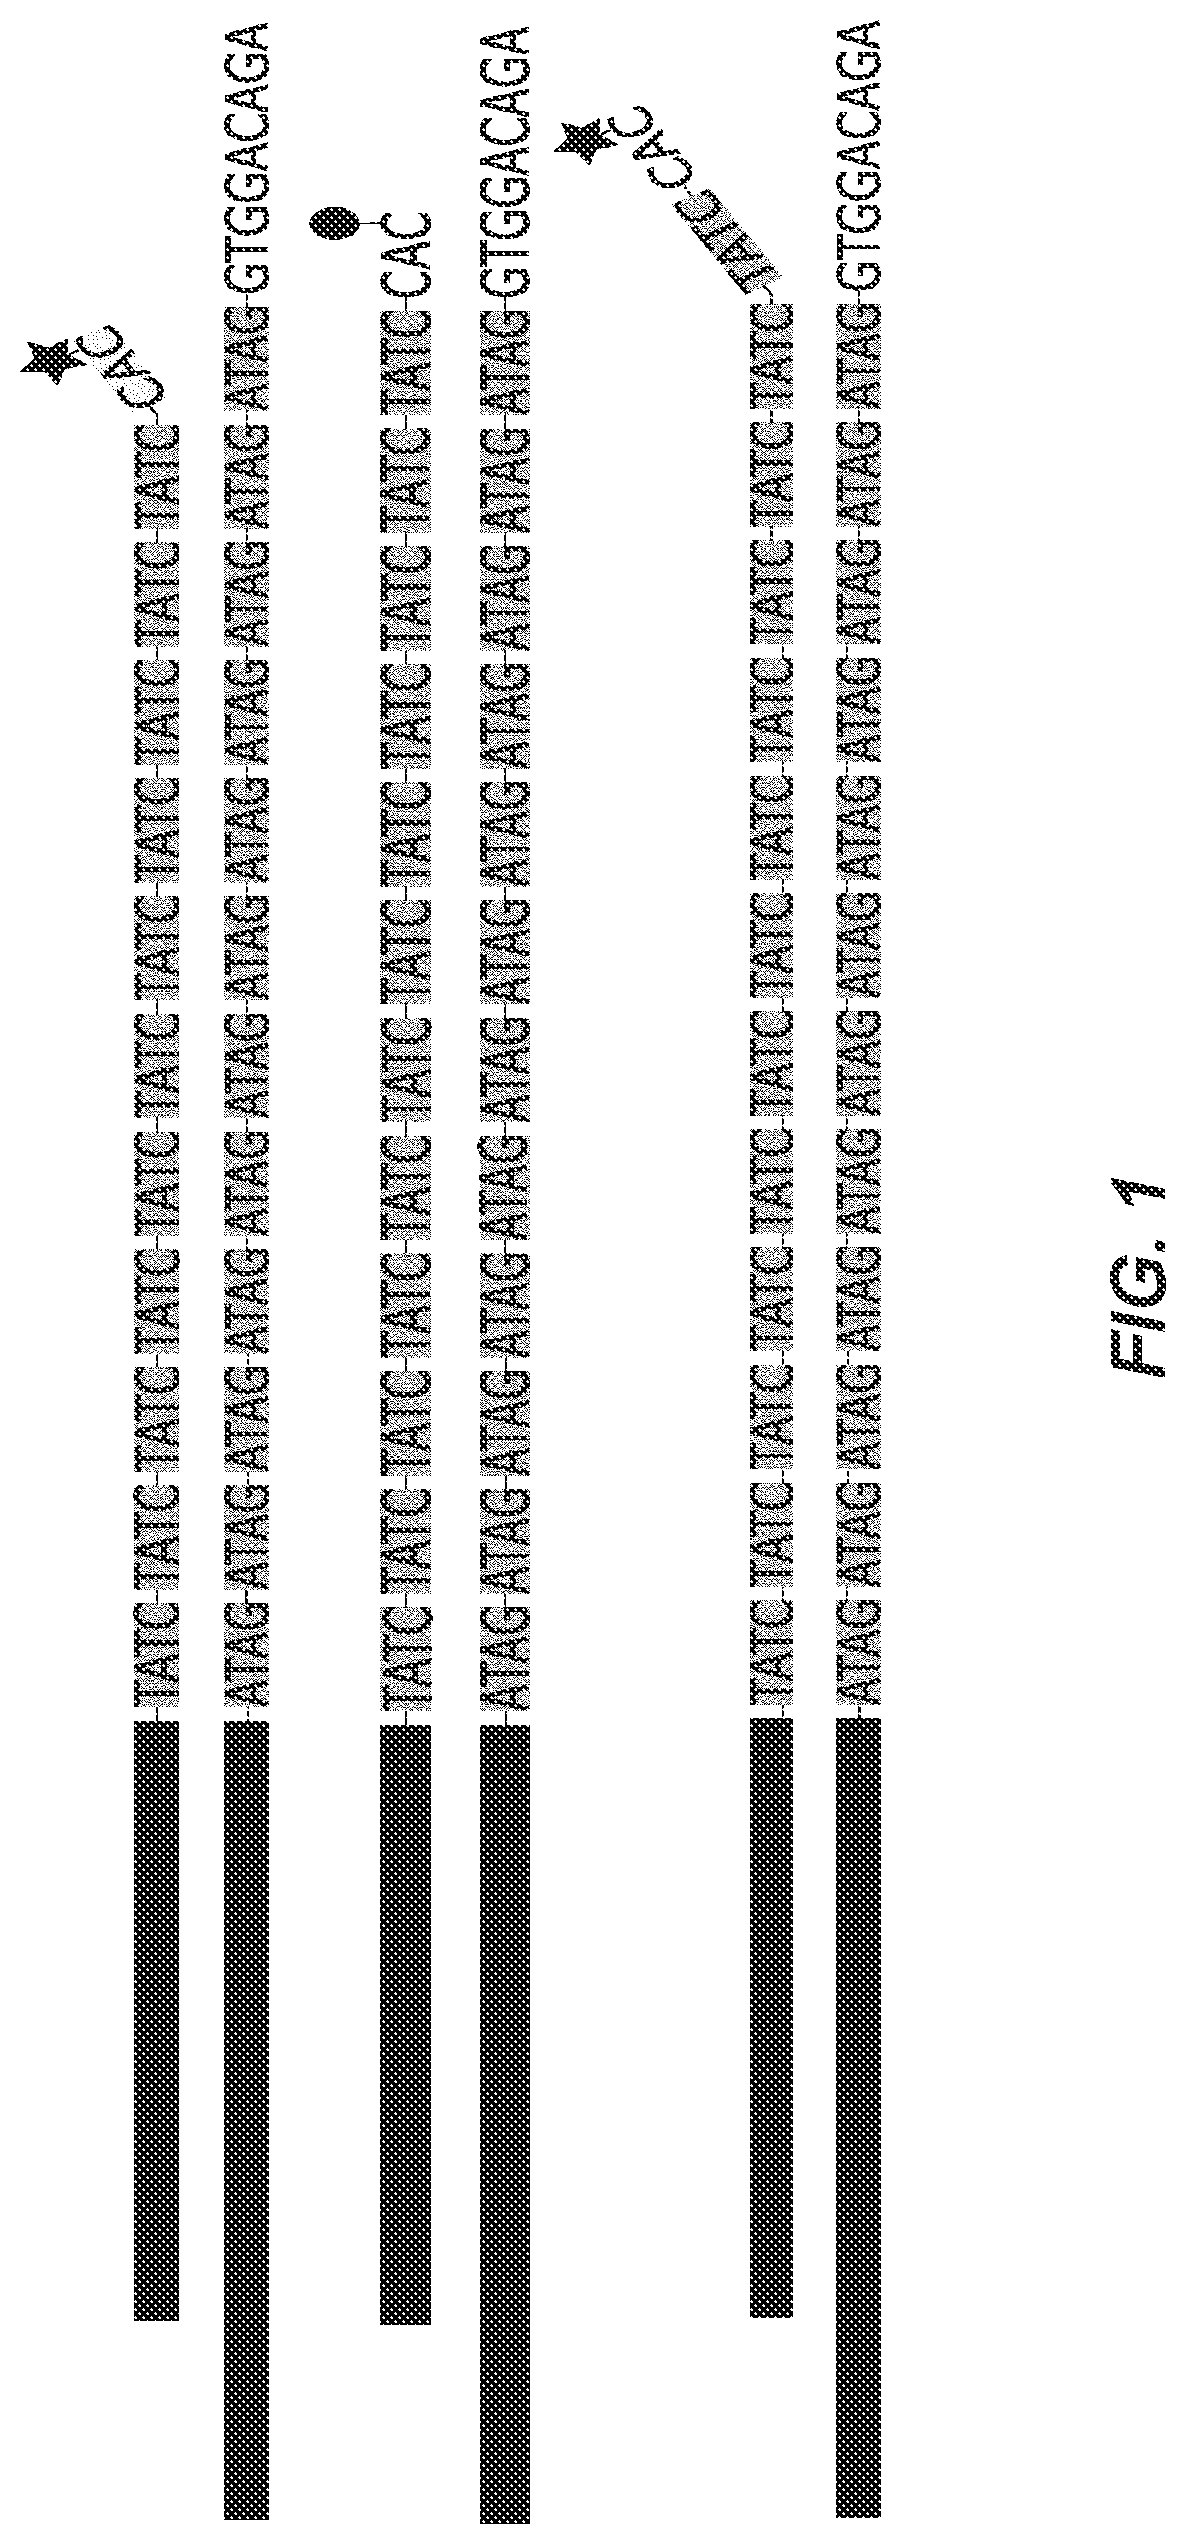 Probe and method for str-genotyping